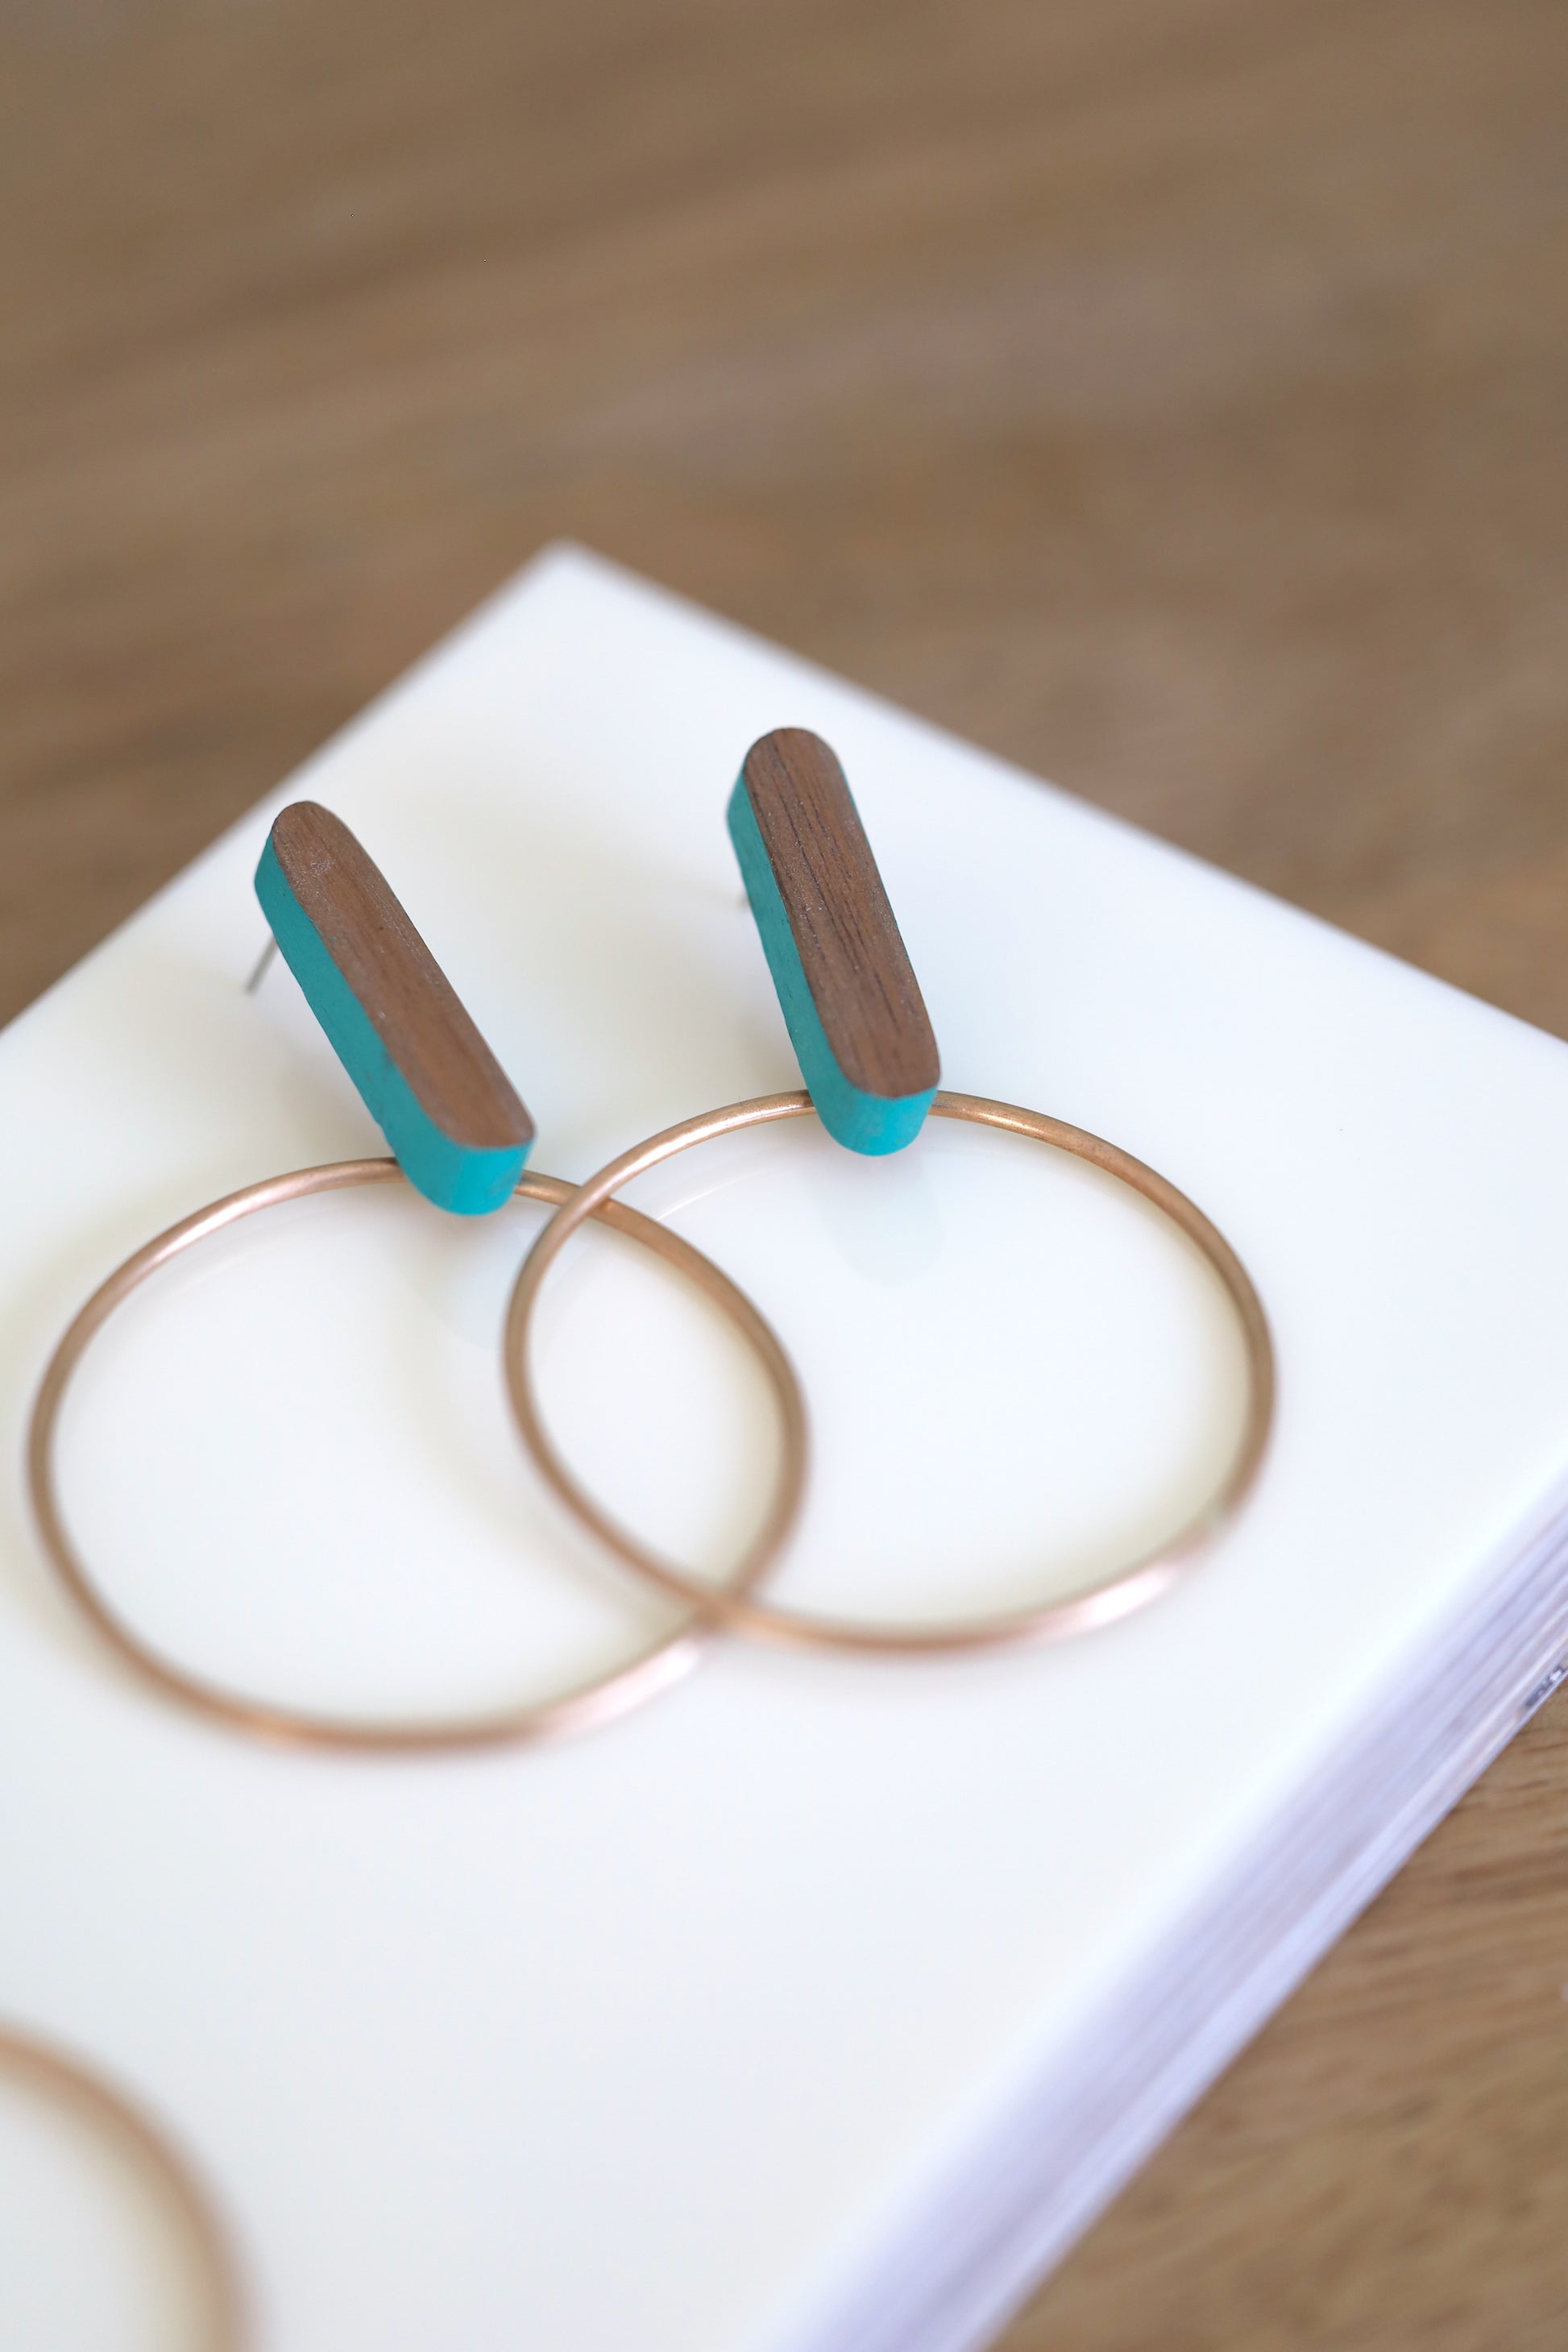 Earrings made of wood with turquoise painted accents and bronze hoops.